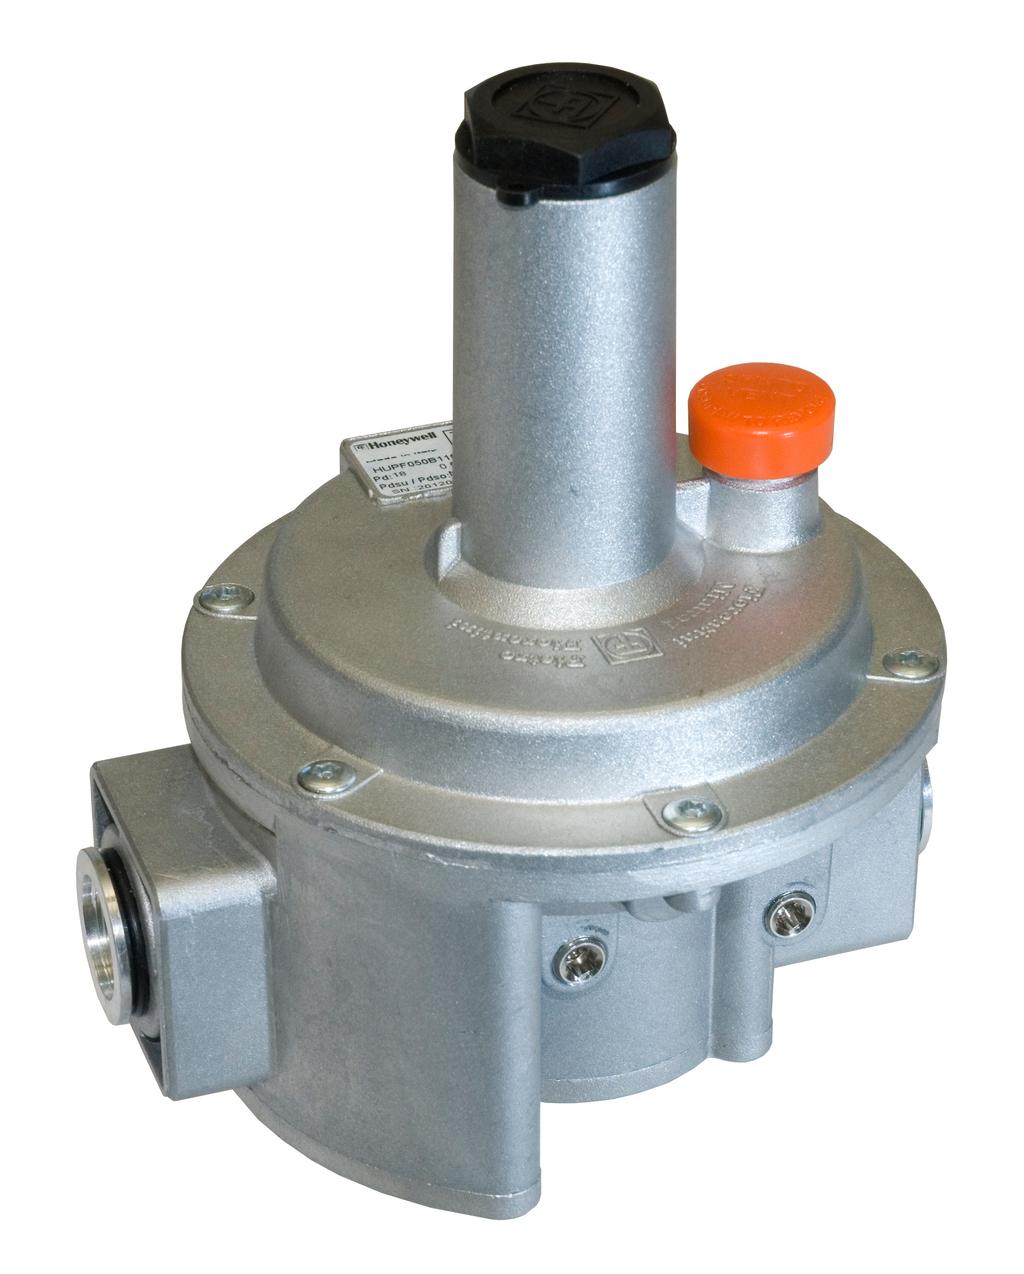 The zero shut-off prevents the outlet pressure from increasing when there is no gas flow through the regulator.